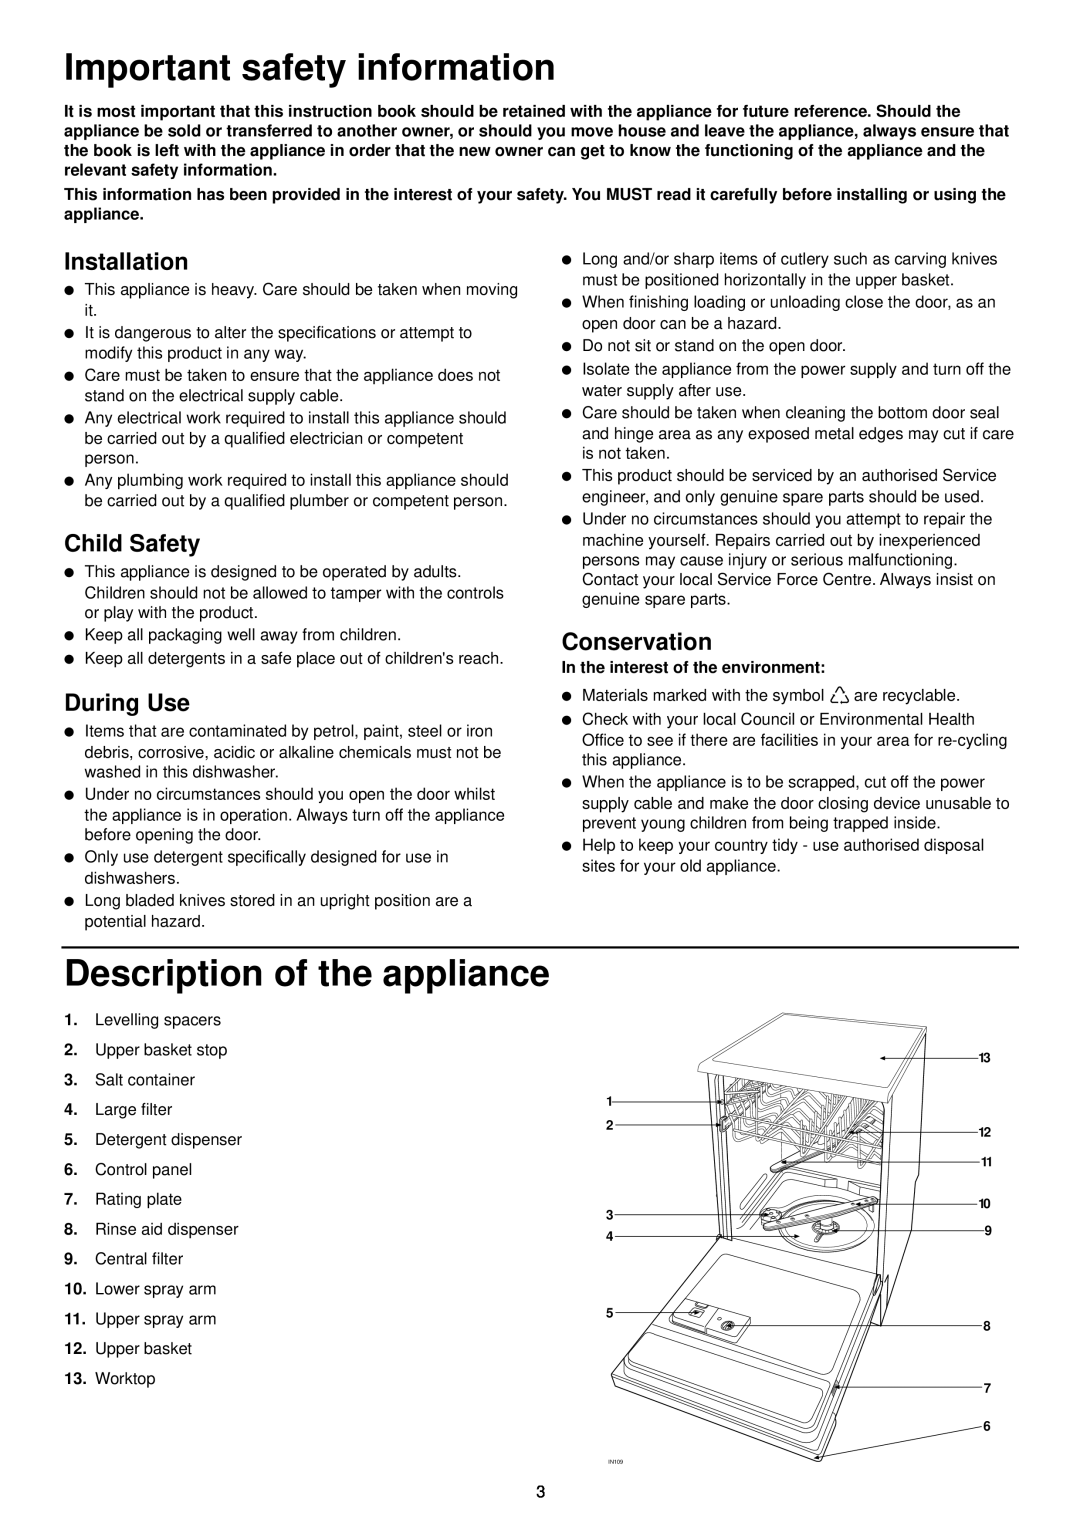 Tricity Bendix BDW 60 Important safety information, Description of the appliance, Installation, Child Safety, During Use 